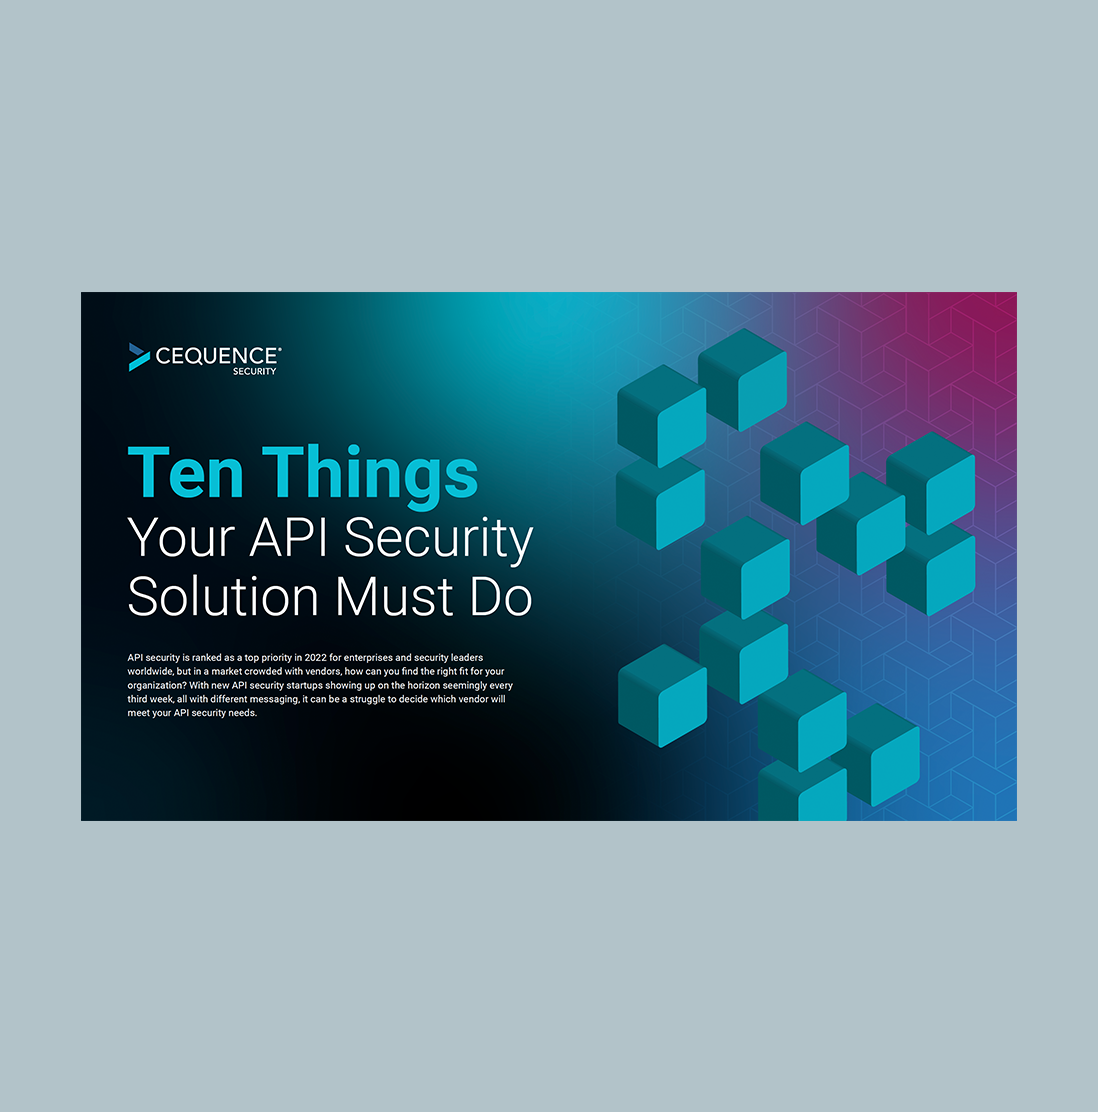 Ten Things Your API Security Solution Must Do